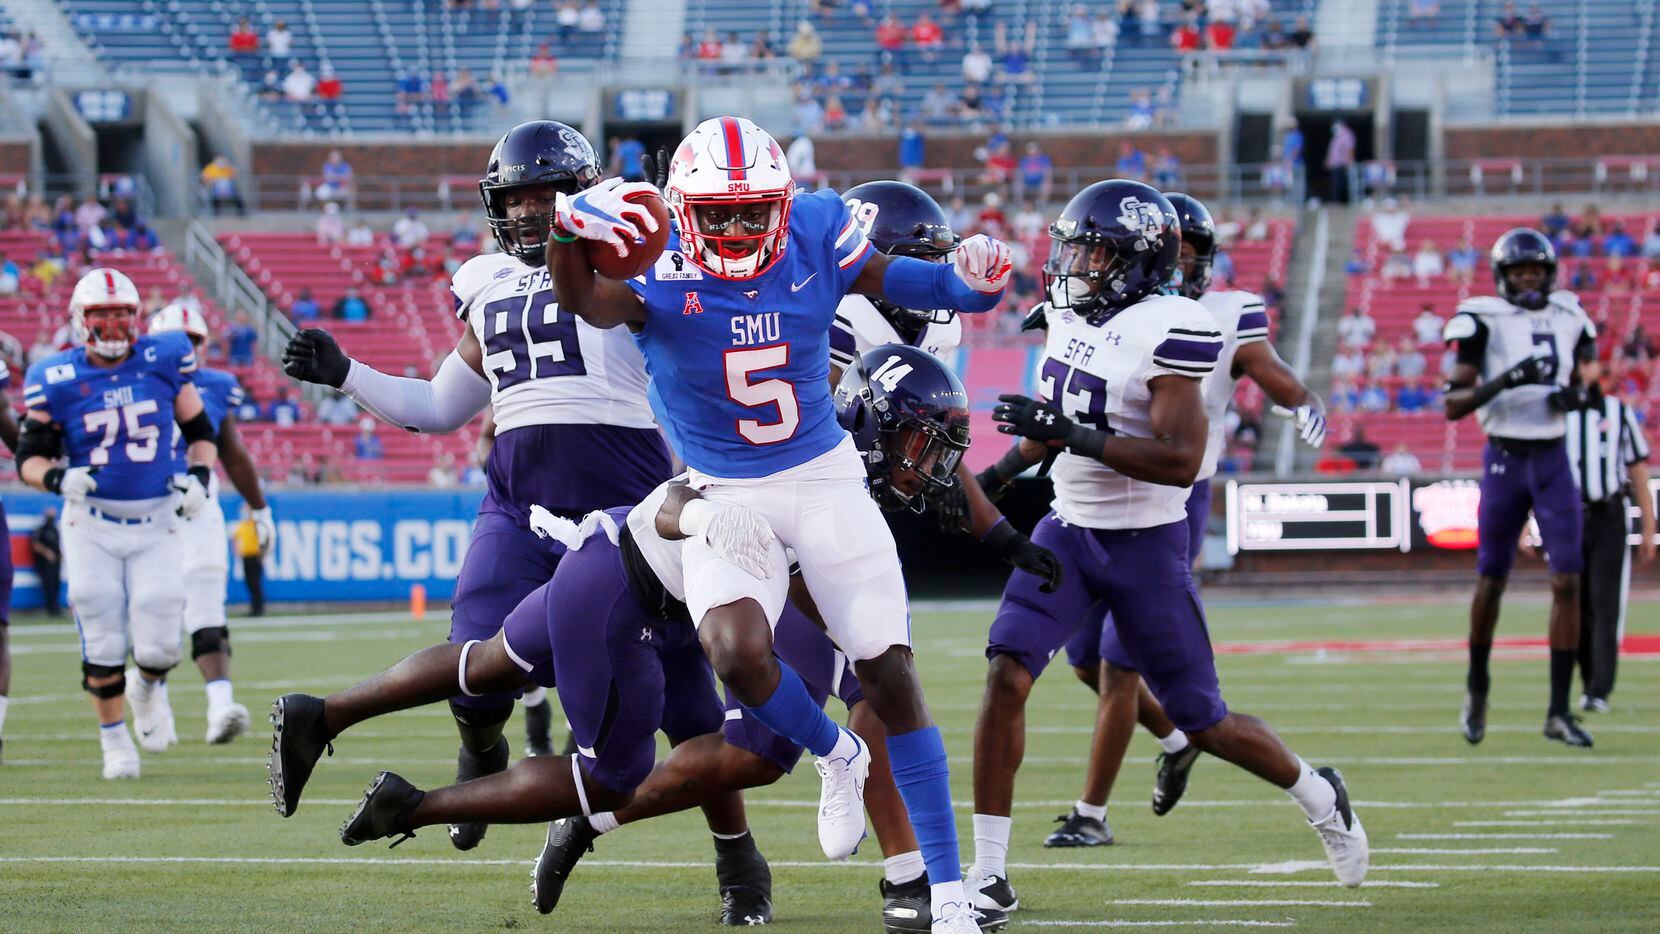 Southern Methodist Mustangs wide receiver Danny Gray (5) scores a touchdown as Stephen F. Austin Lumberjacks defensive back Kris McCune (14) fails to stop him during the first half of their home opener at Ford Stadium in Dallas, on Saturday, September 26, 2020.